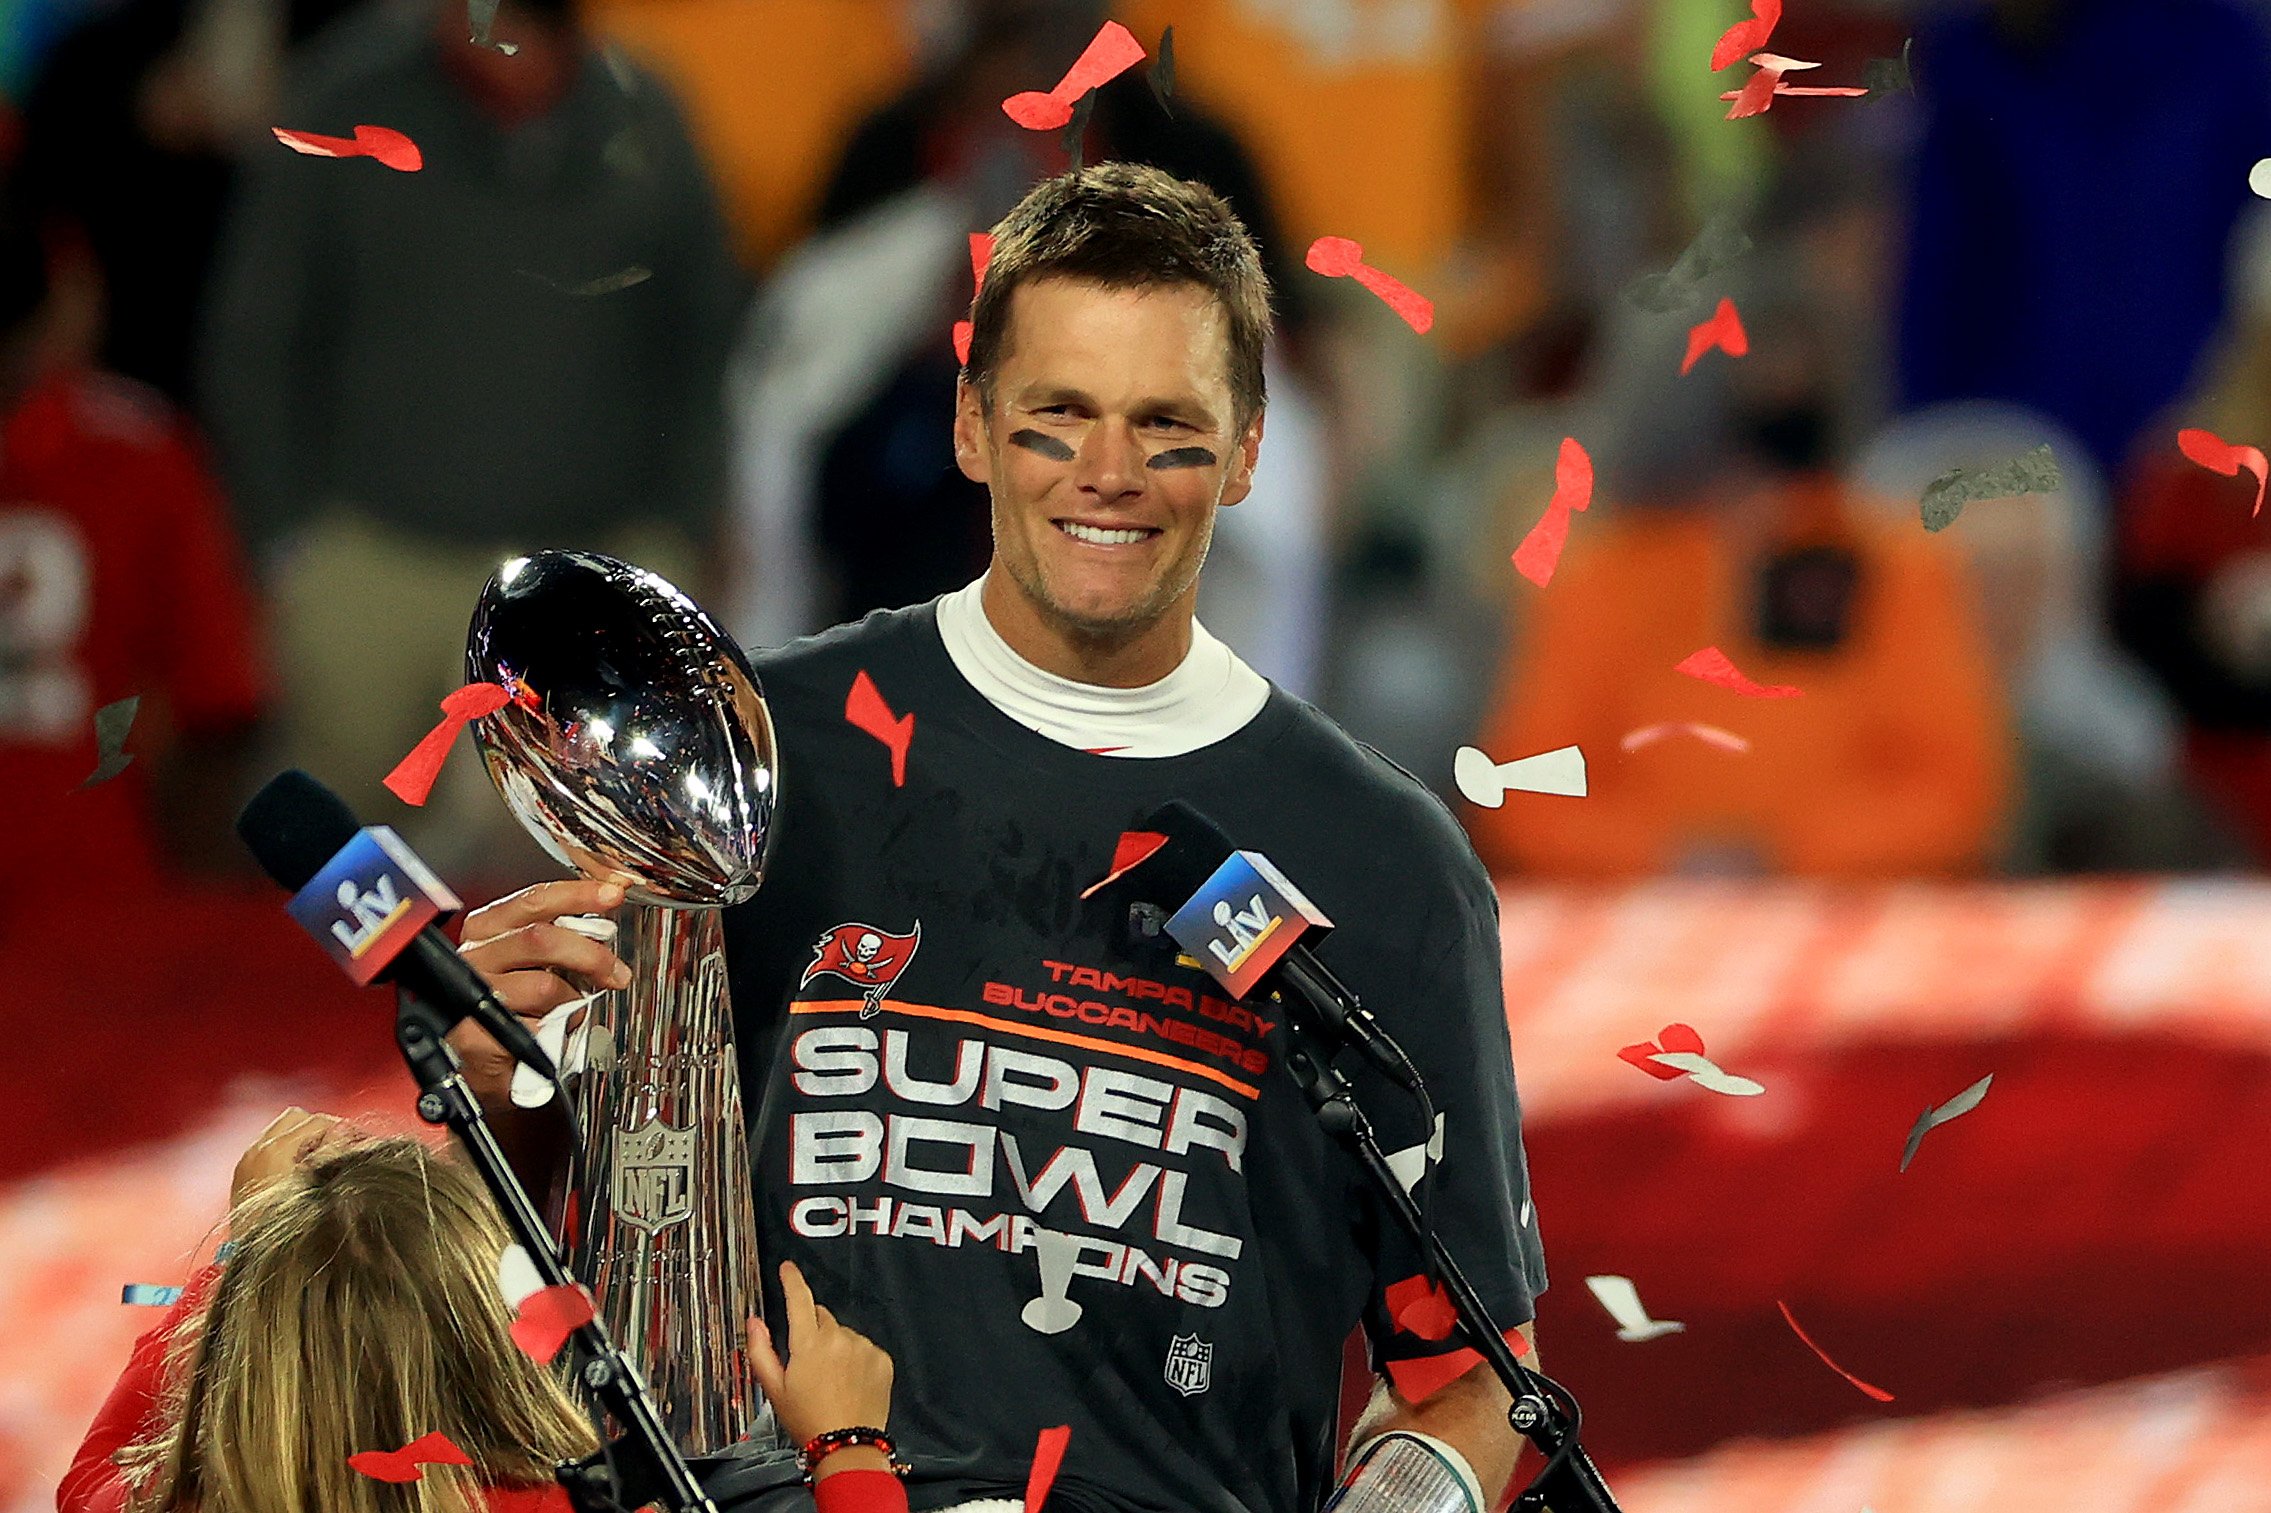 Tom Brady hoists the Vince Lombardi Trophy after winning Super Bowl LV at Raymond James Stadium on February 07, 2021 | Photo: Getty Images